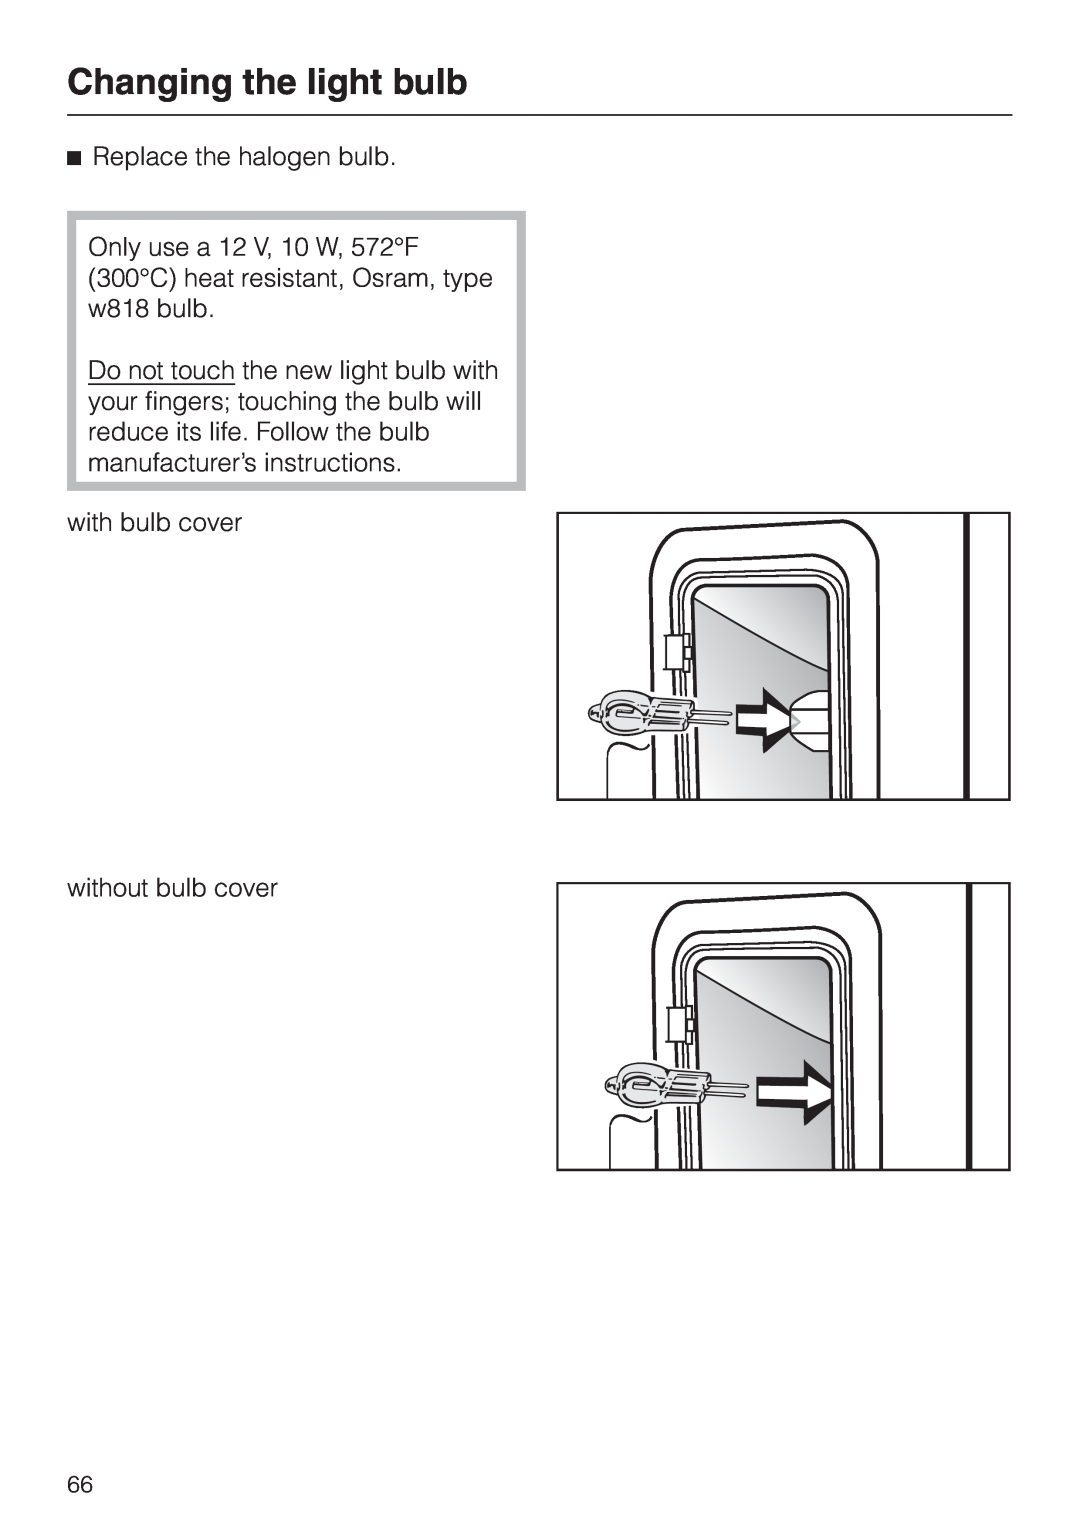 Miele H396B, H395B Changing the light bulb, Replace the halogen bulb, with bulb cover without bulb cover 